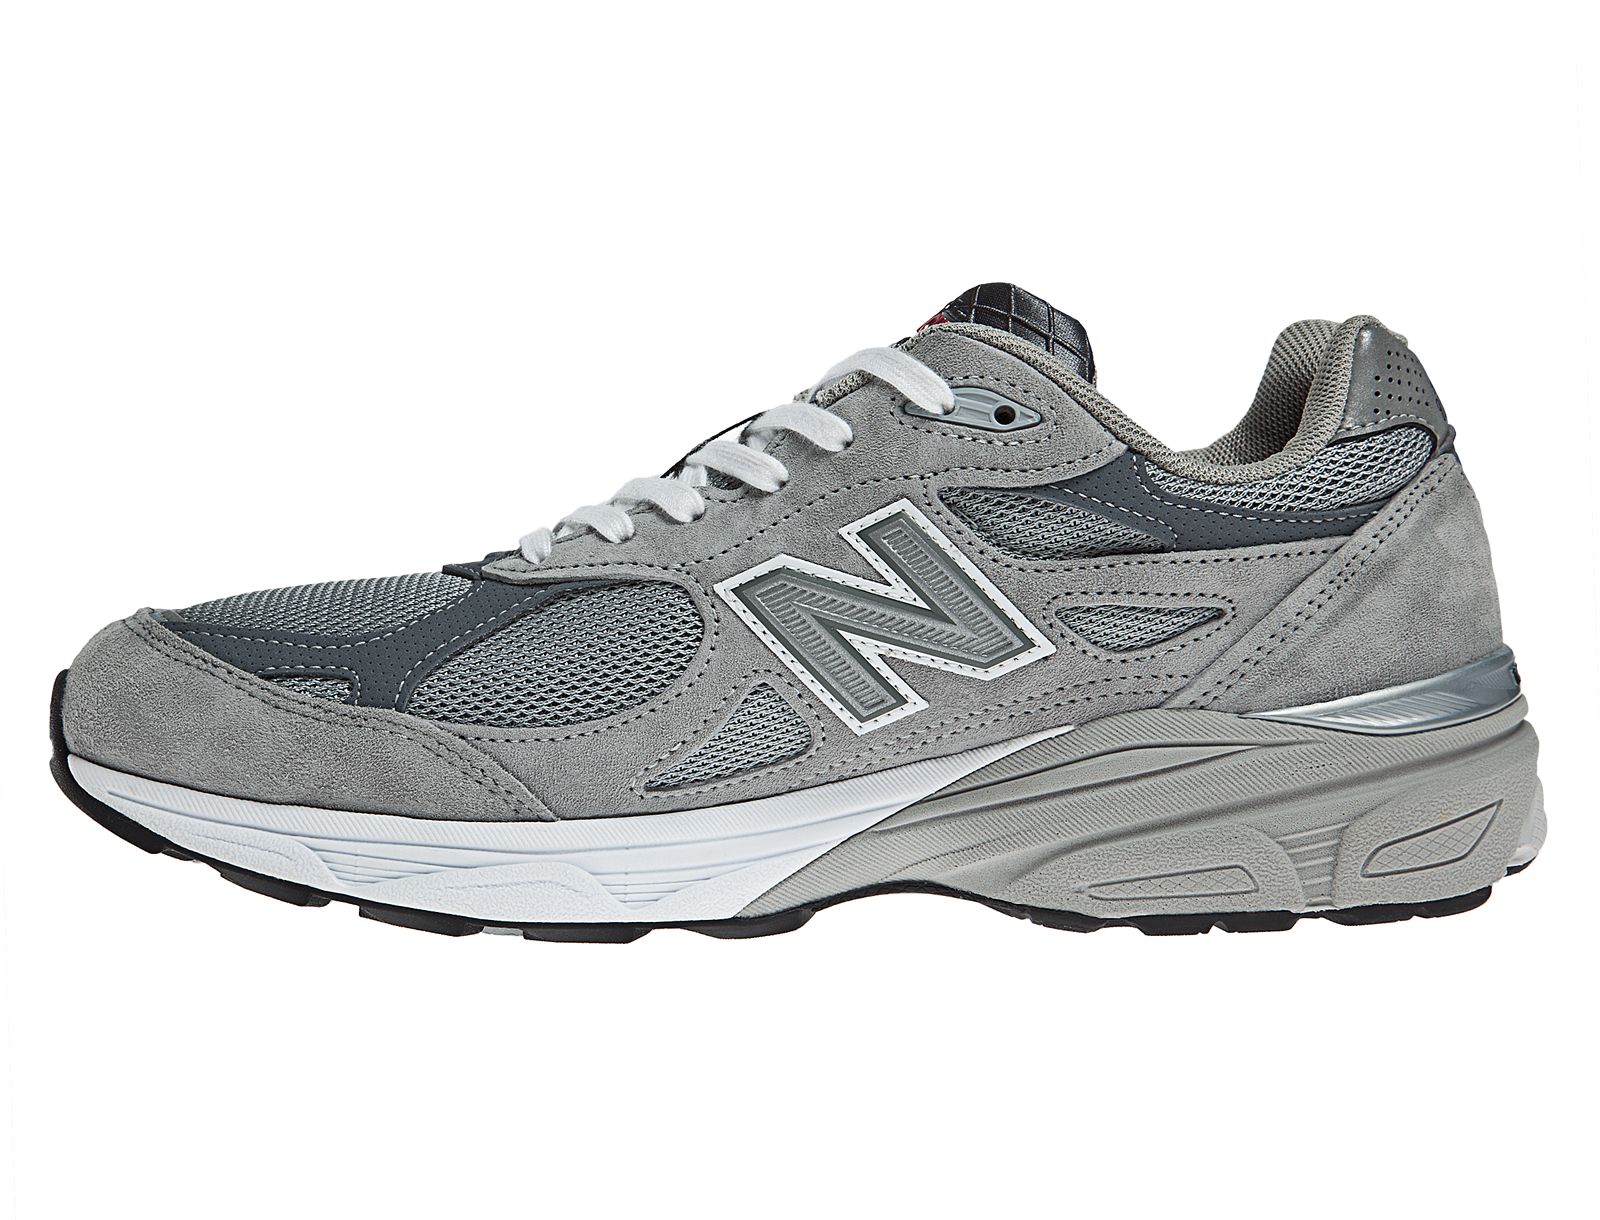 Off on M990GL3 at Joe's New Balance Outlet